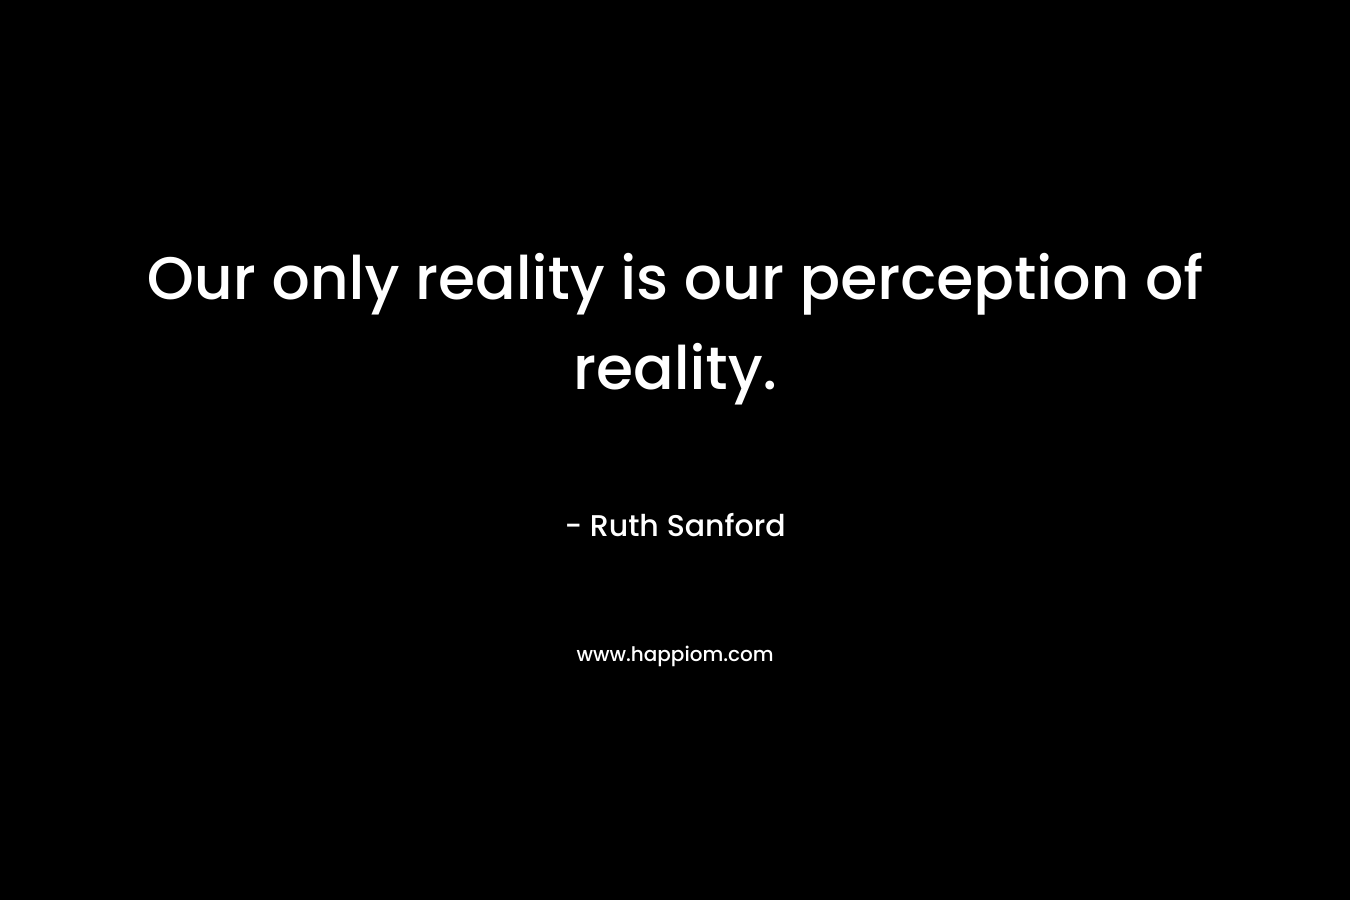 Our only reality is our perception of reality. – Ruth Sanford